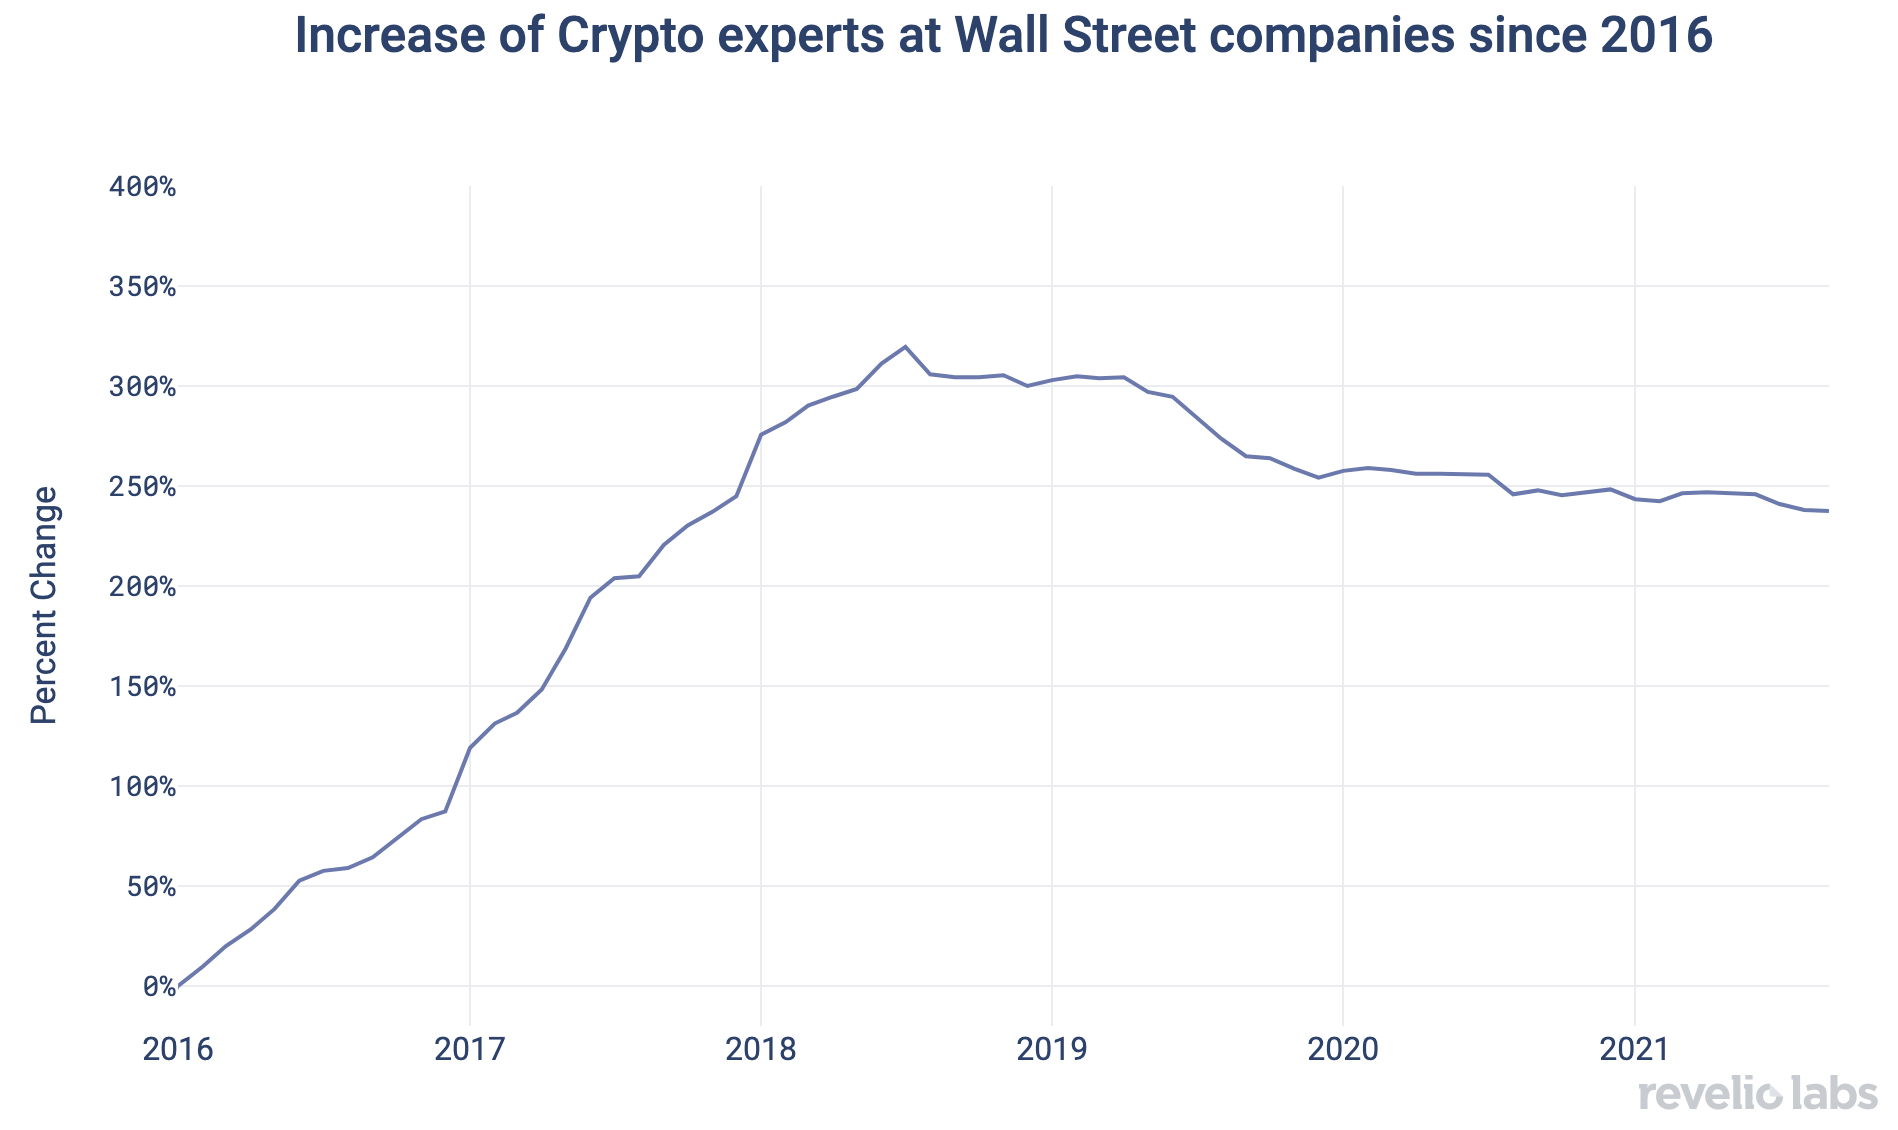 Increase of Crypto Experts at Wall Street companies since 2016